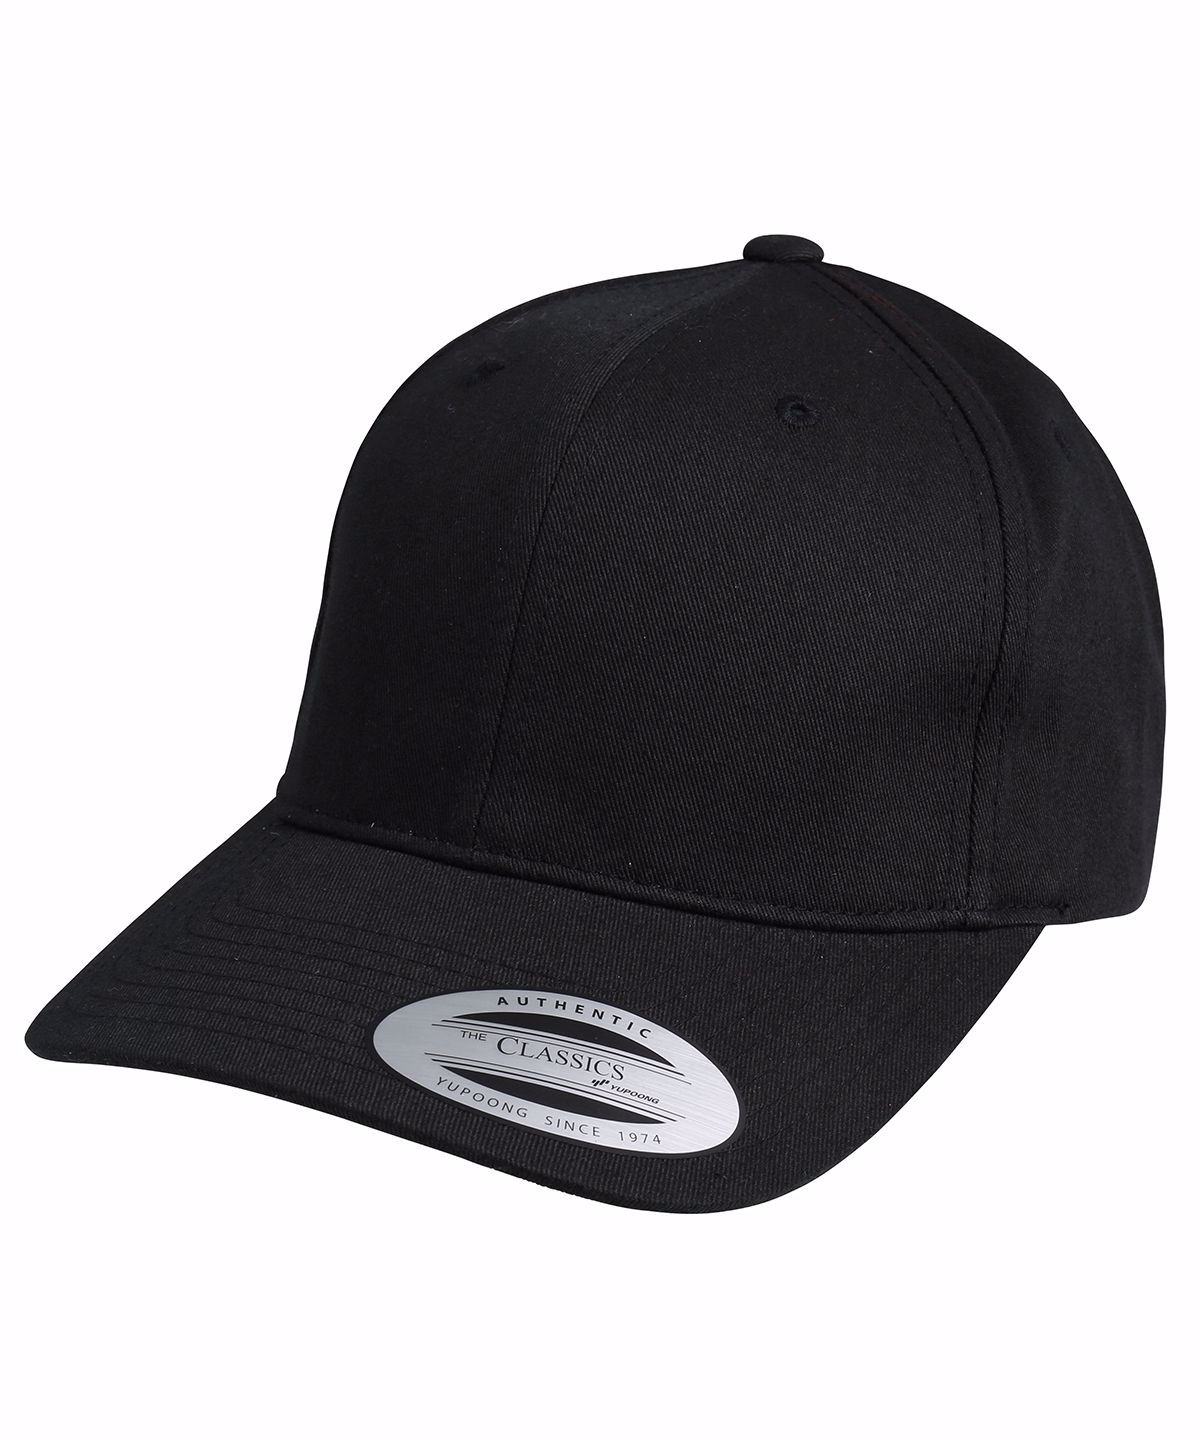 Sporty Thoughts. LA baseball cap (with adjustable strap) | Sporty Thoughts